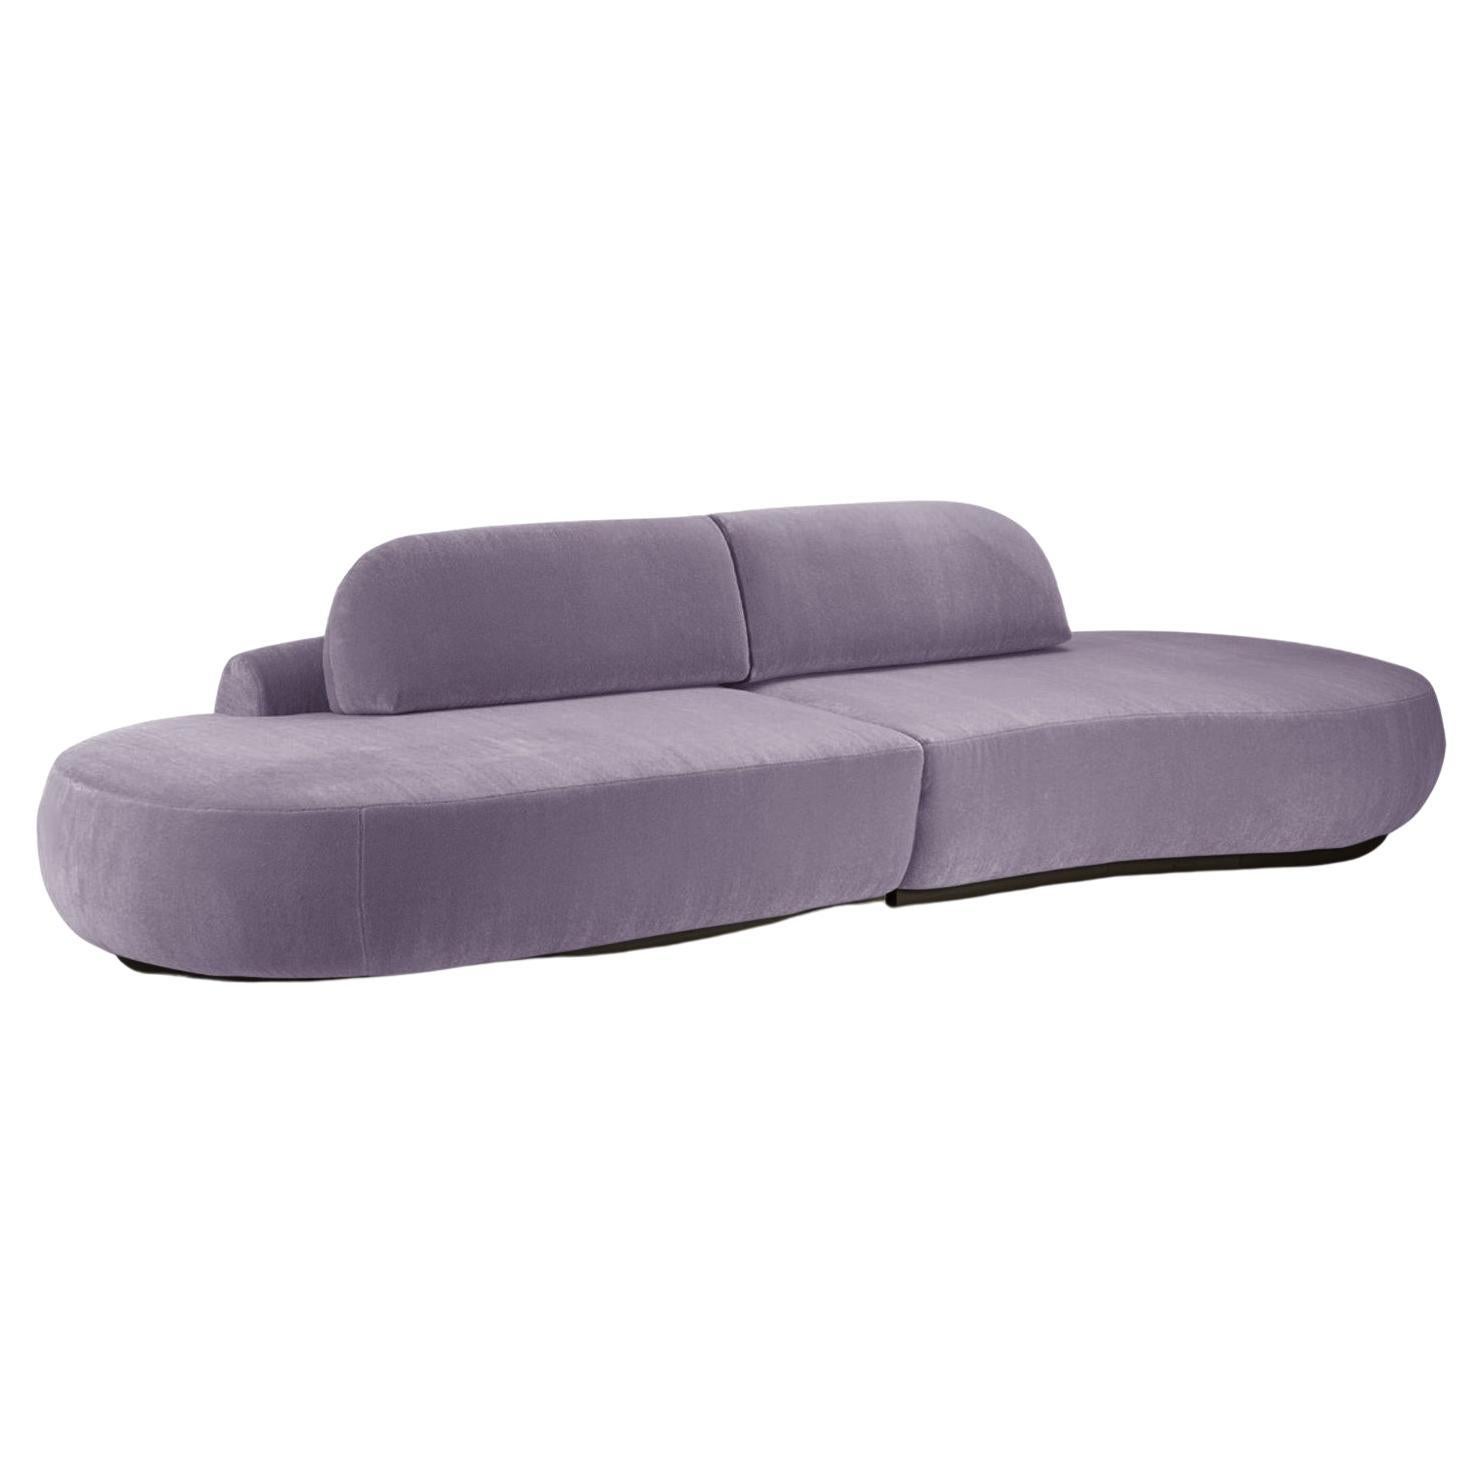 Naked Curved Sectional Sofa, 2 Piece with Beech Ash-056-5 and Paris Lavanda